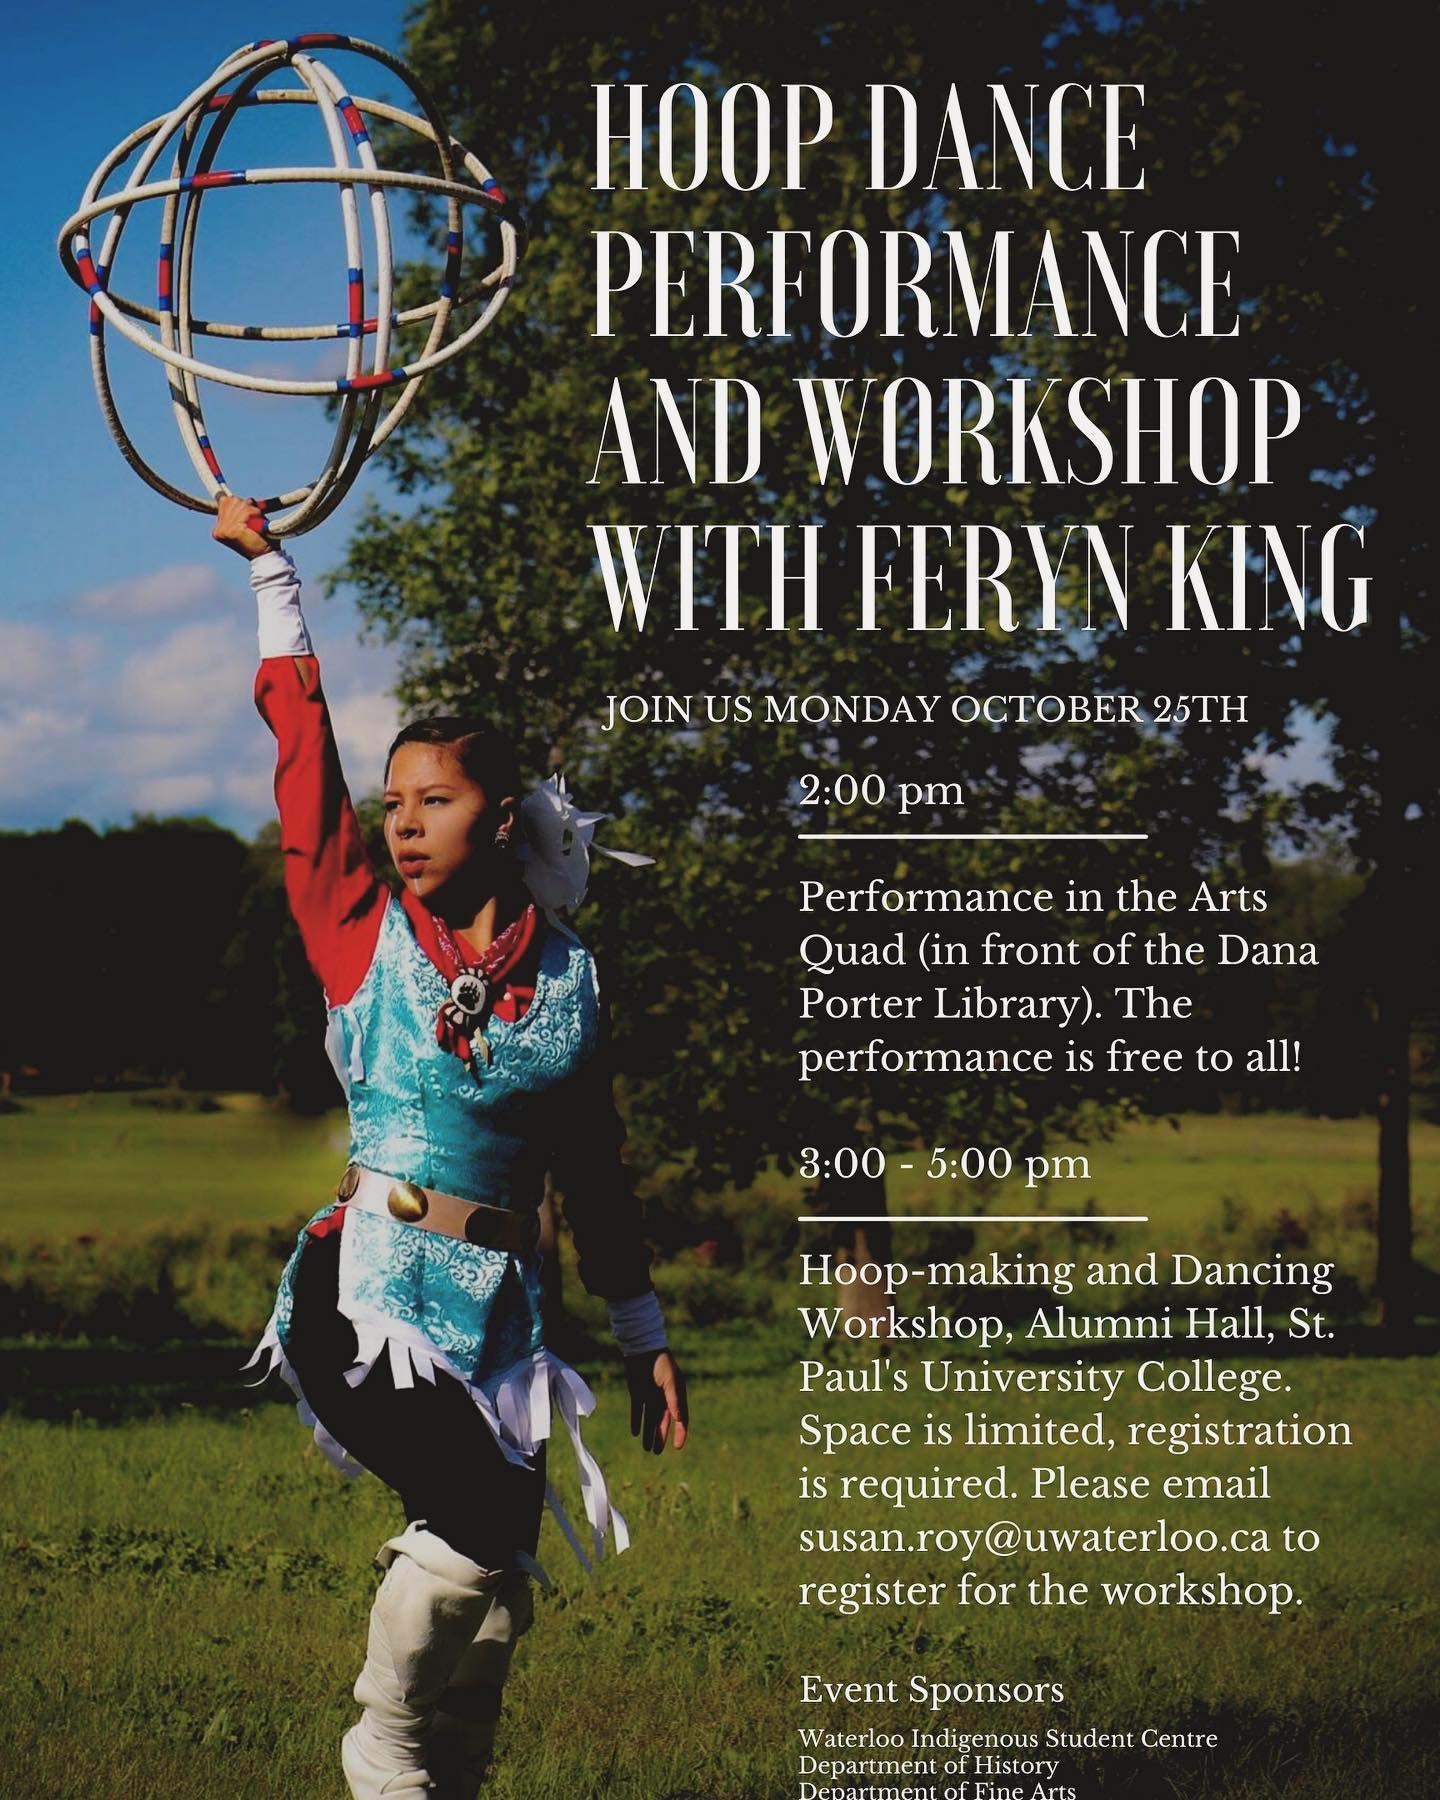 Hoop dance performance and workshop with Feryn King, October 25th